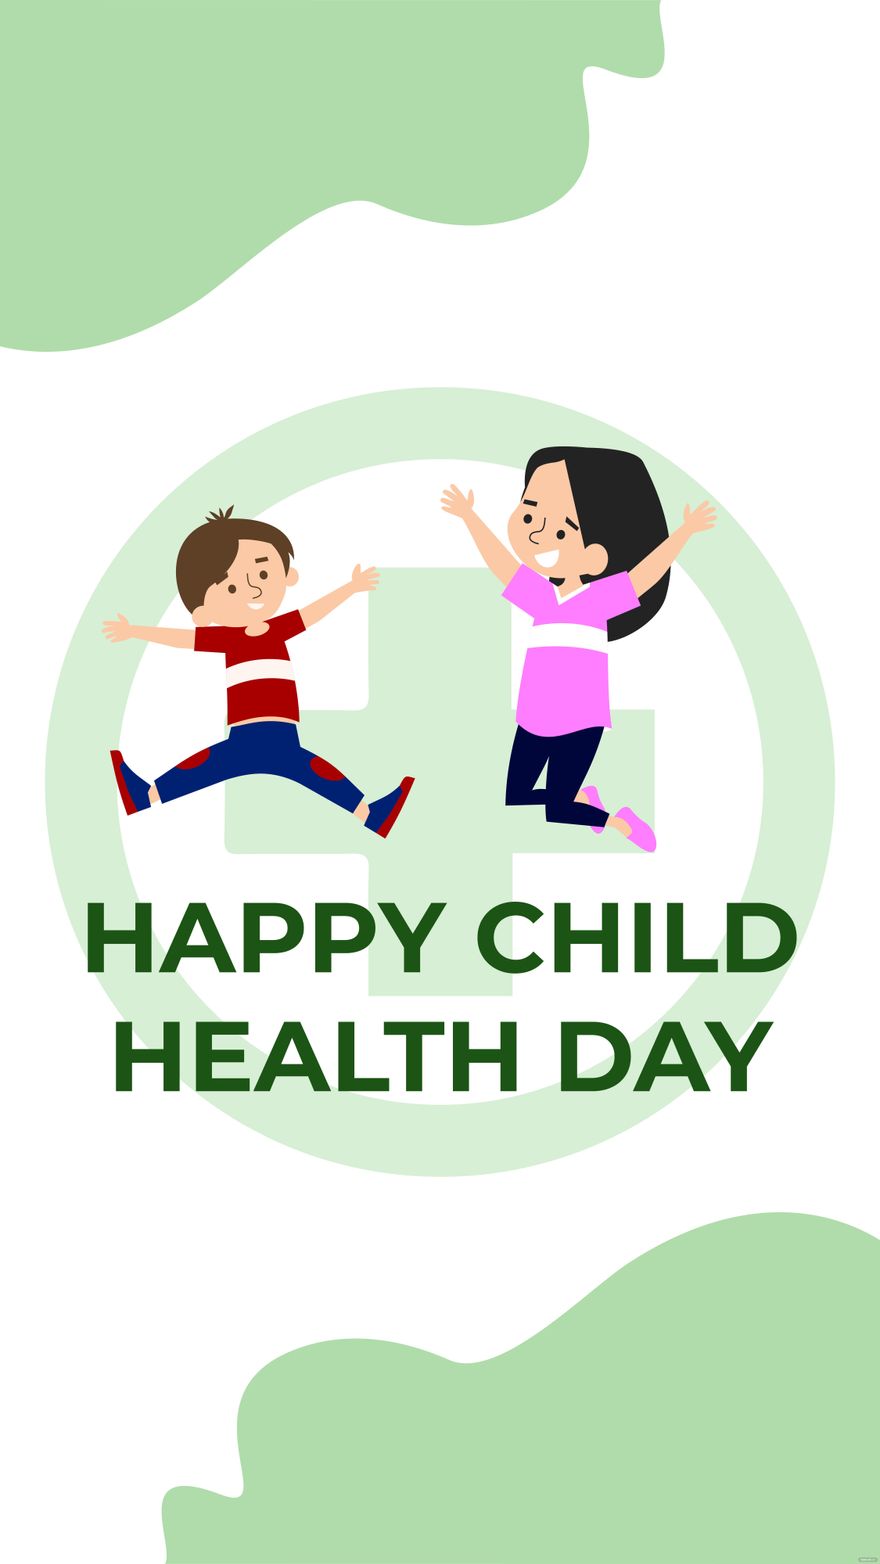 Free Child Health Day iPhone Background in PDF, Illustrator, PSD, EPS, SVG, JPG, PNG